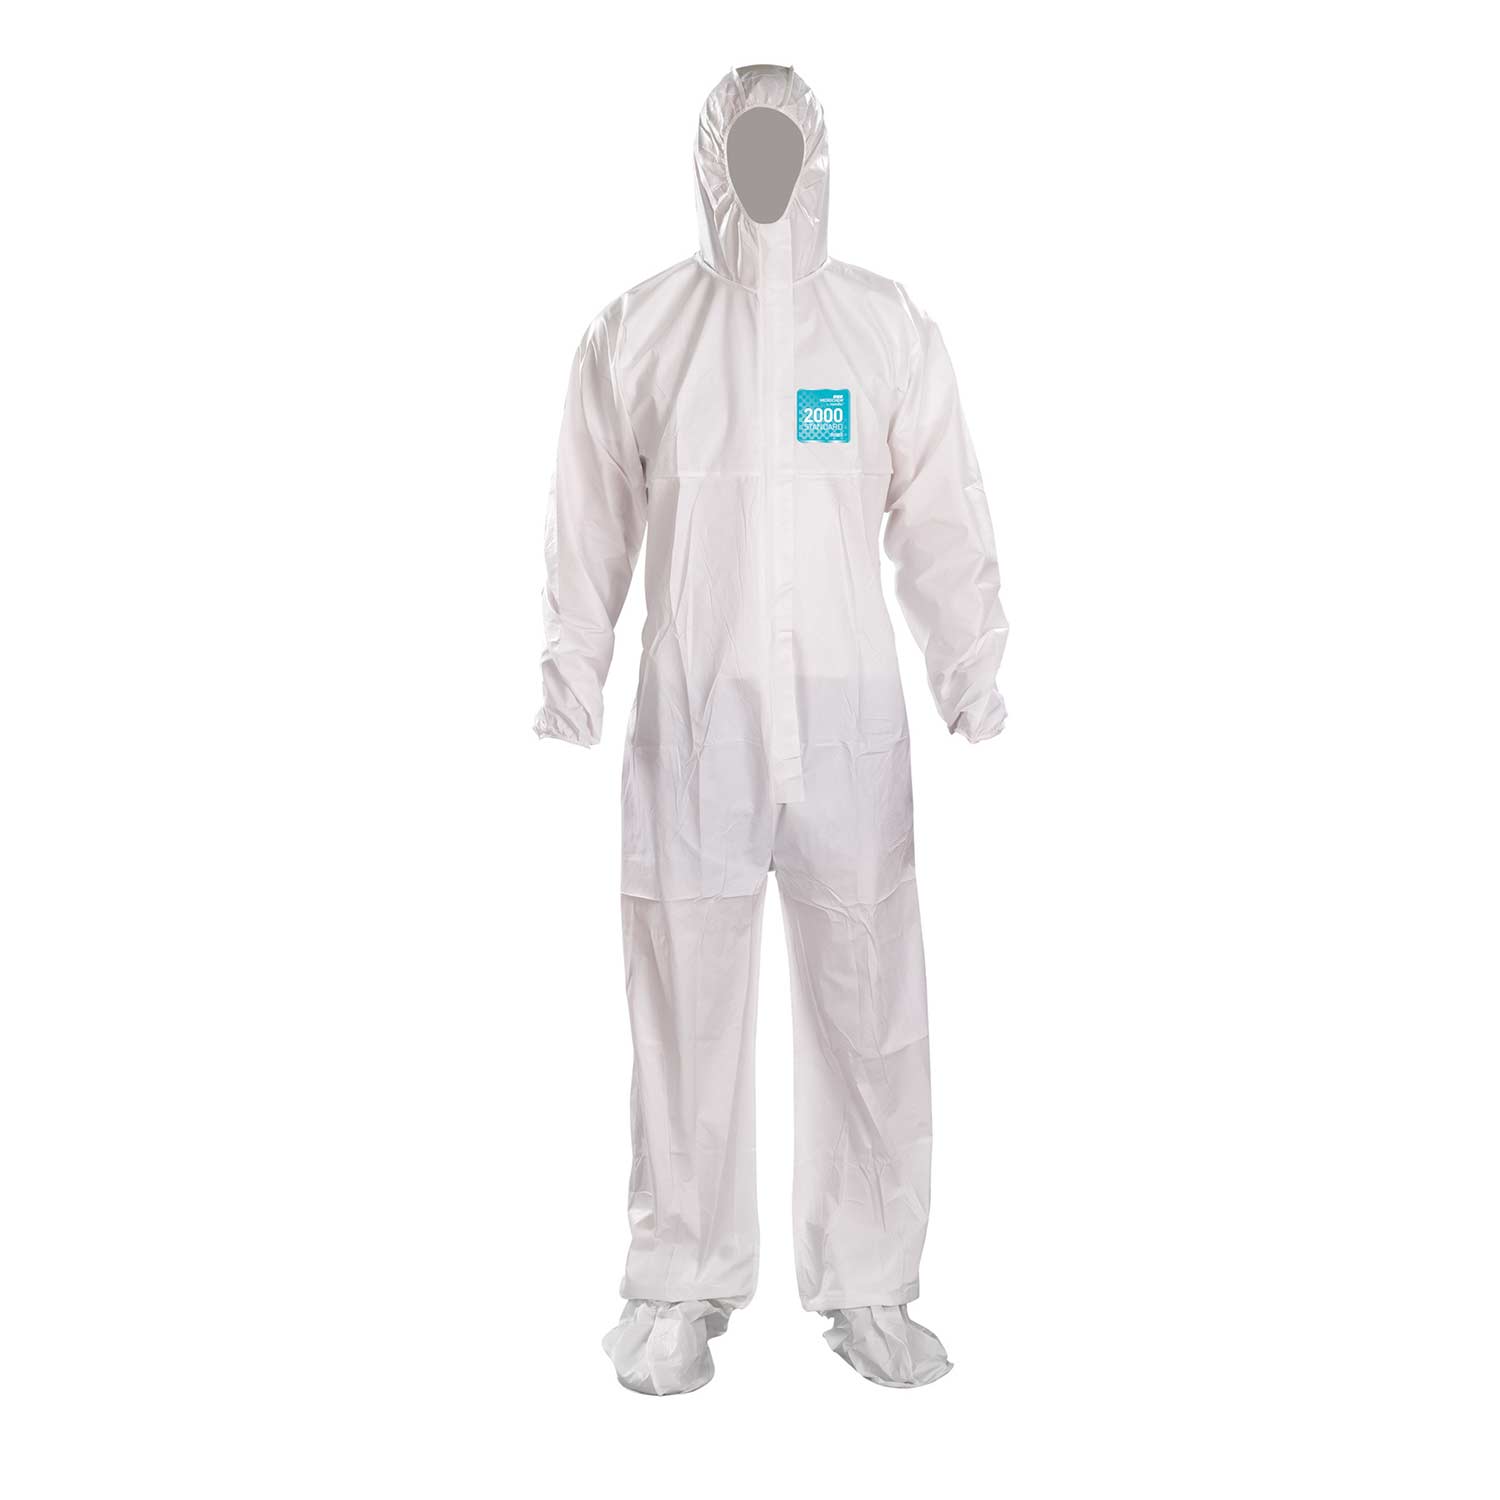 AlphaTec Ansell Healthcare Microchem 2000 Coveralls (Case of